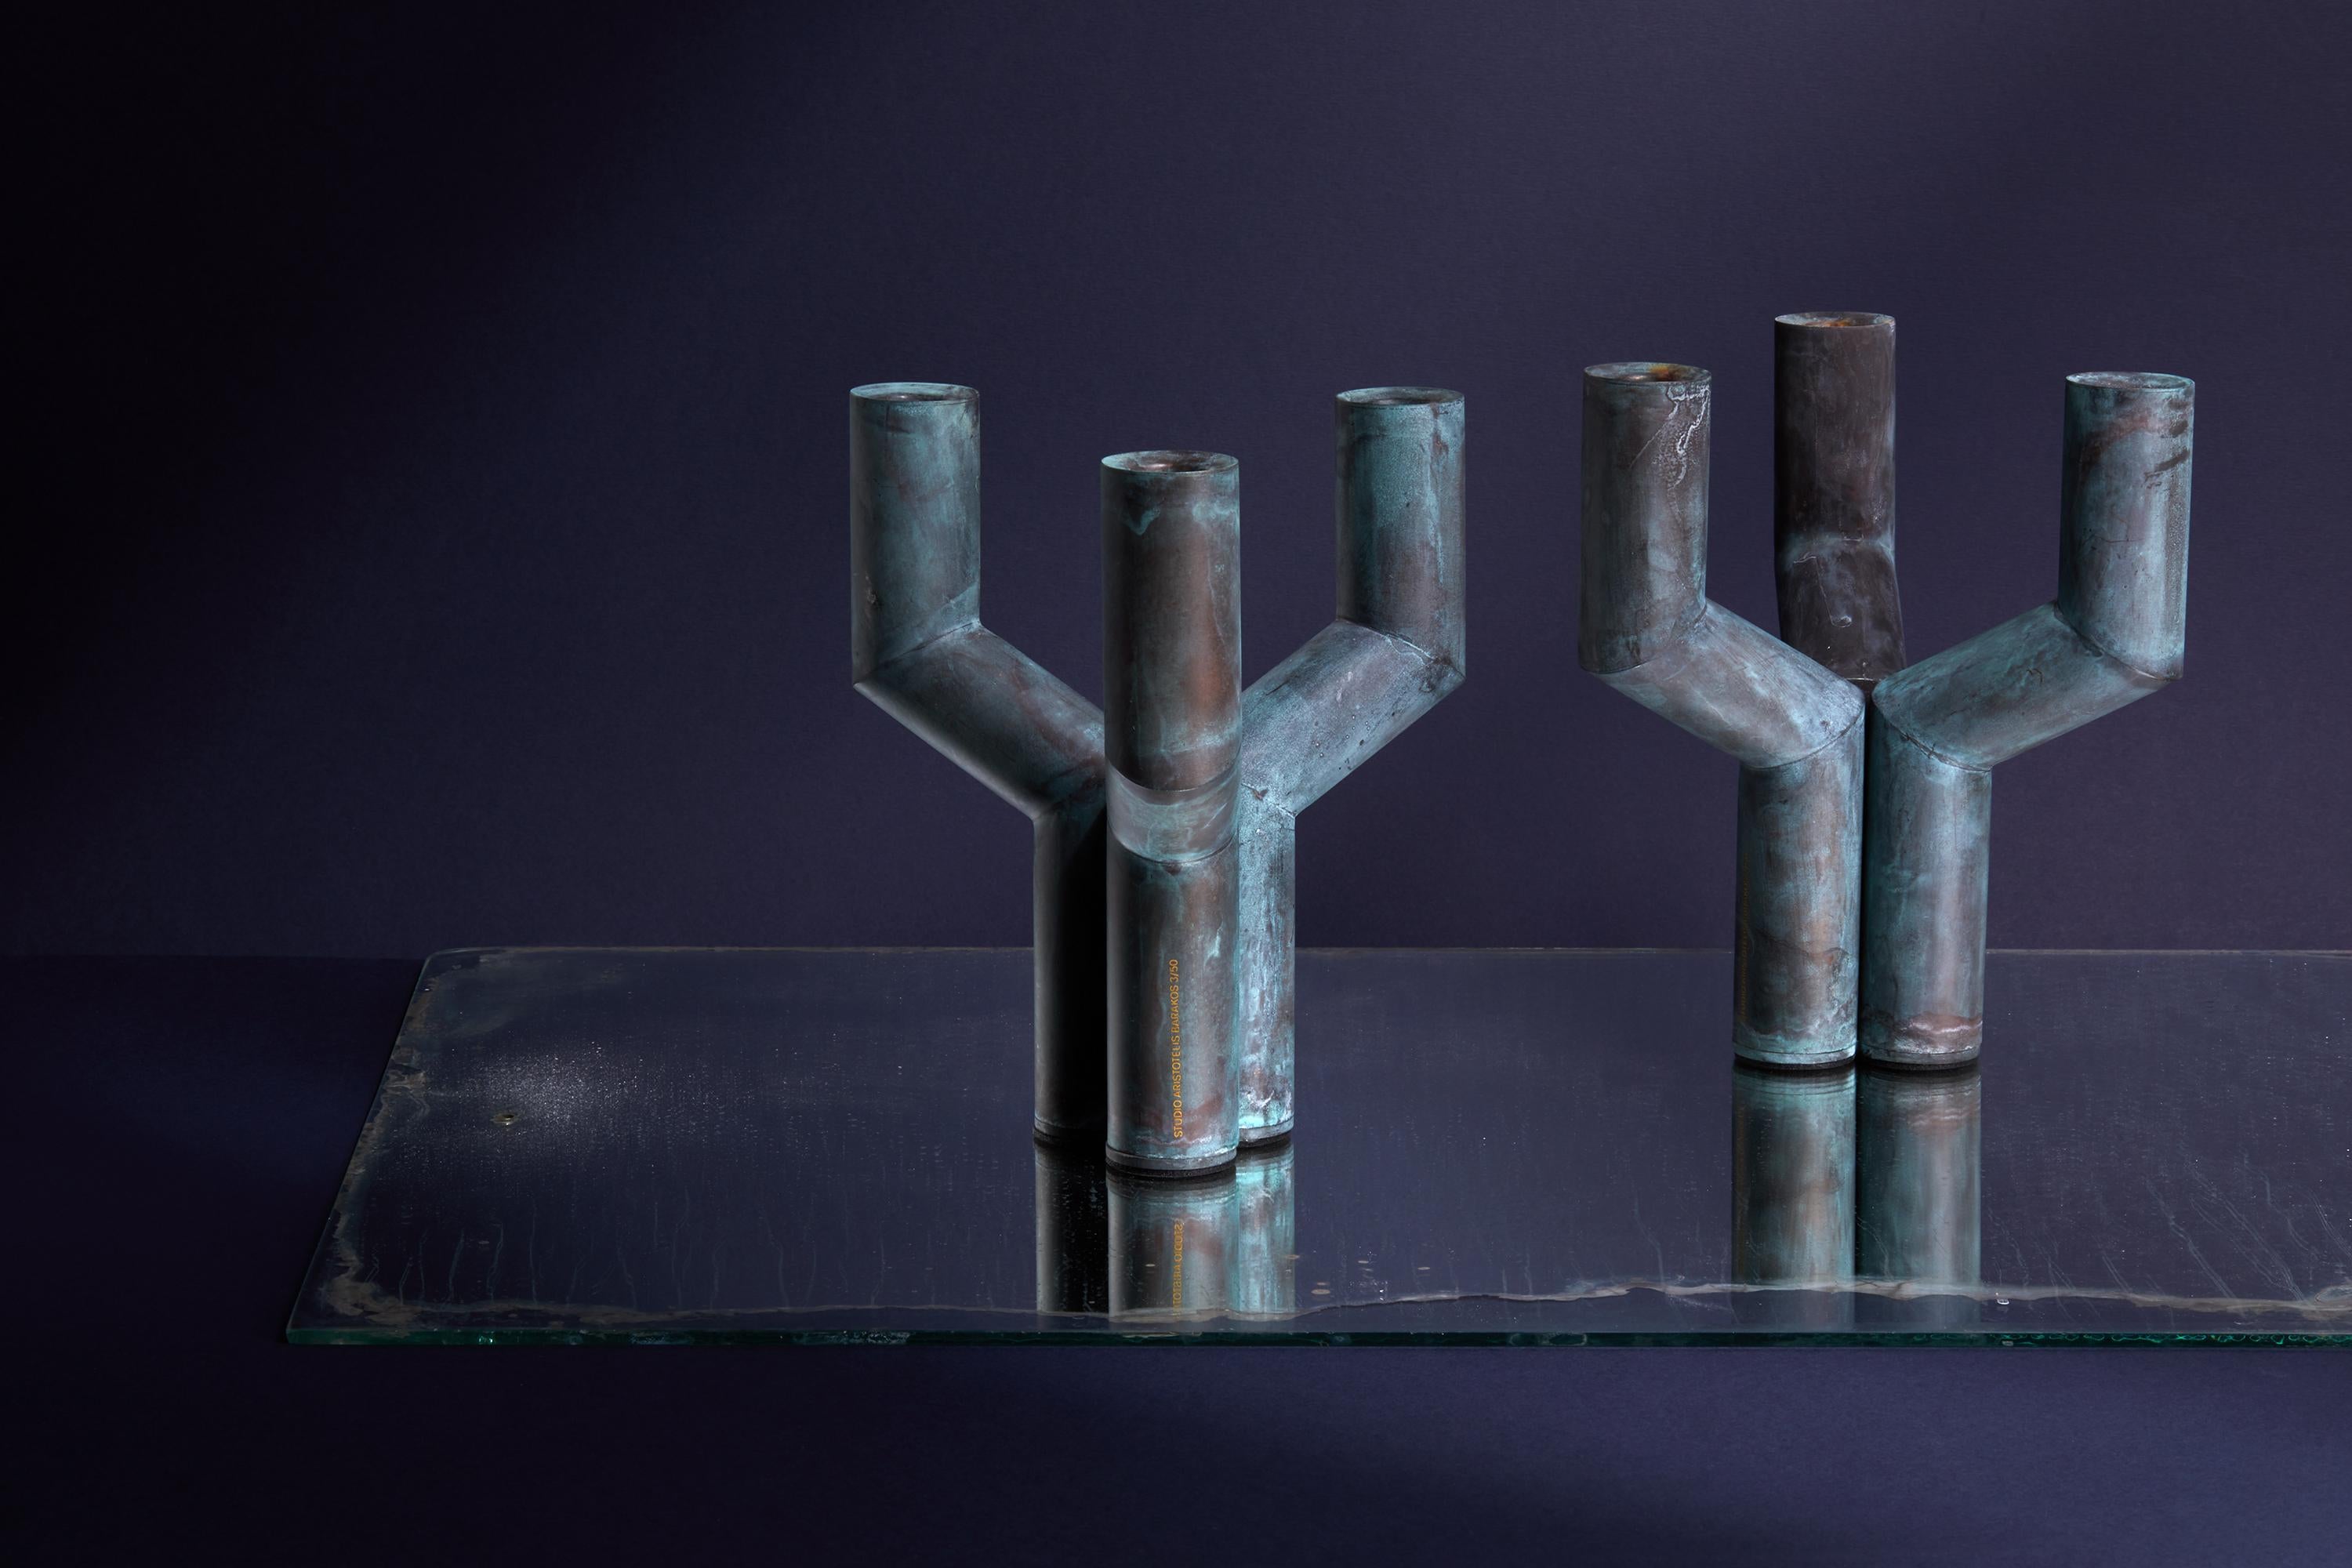 Sermon Verdigris is a limited-edition brass candleholder by Studio Aristotelis Barakos.

It is a meticulously finished object that exudes an antique allure, its surface transitioning from deep black to timeless verdigris green, echoing ancient